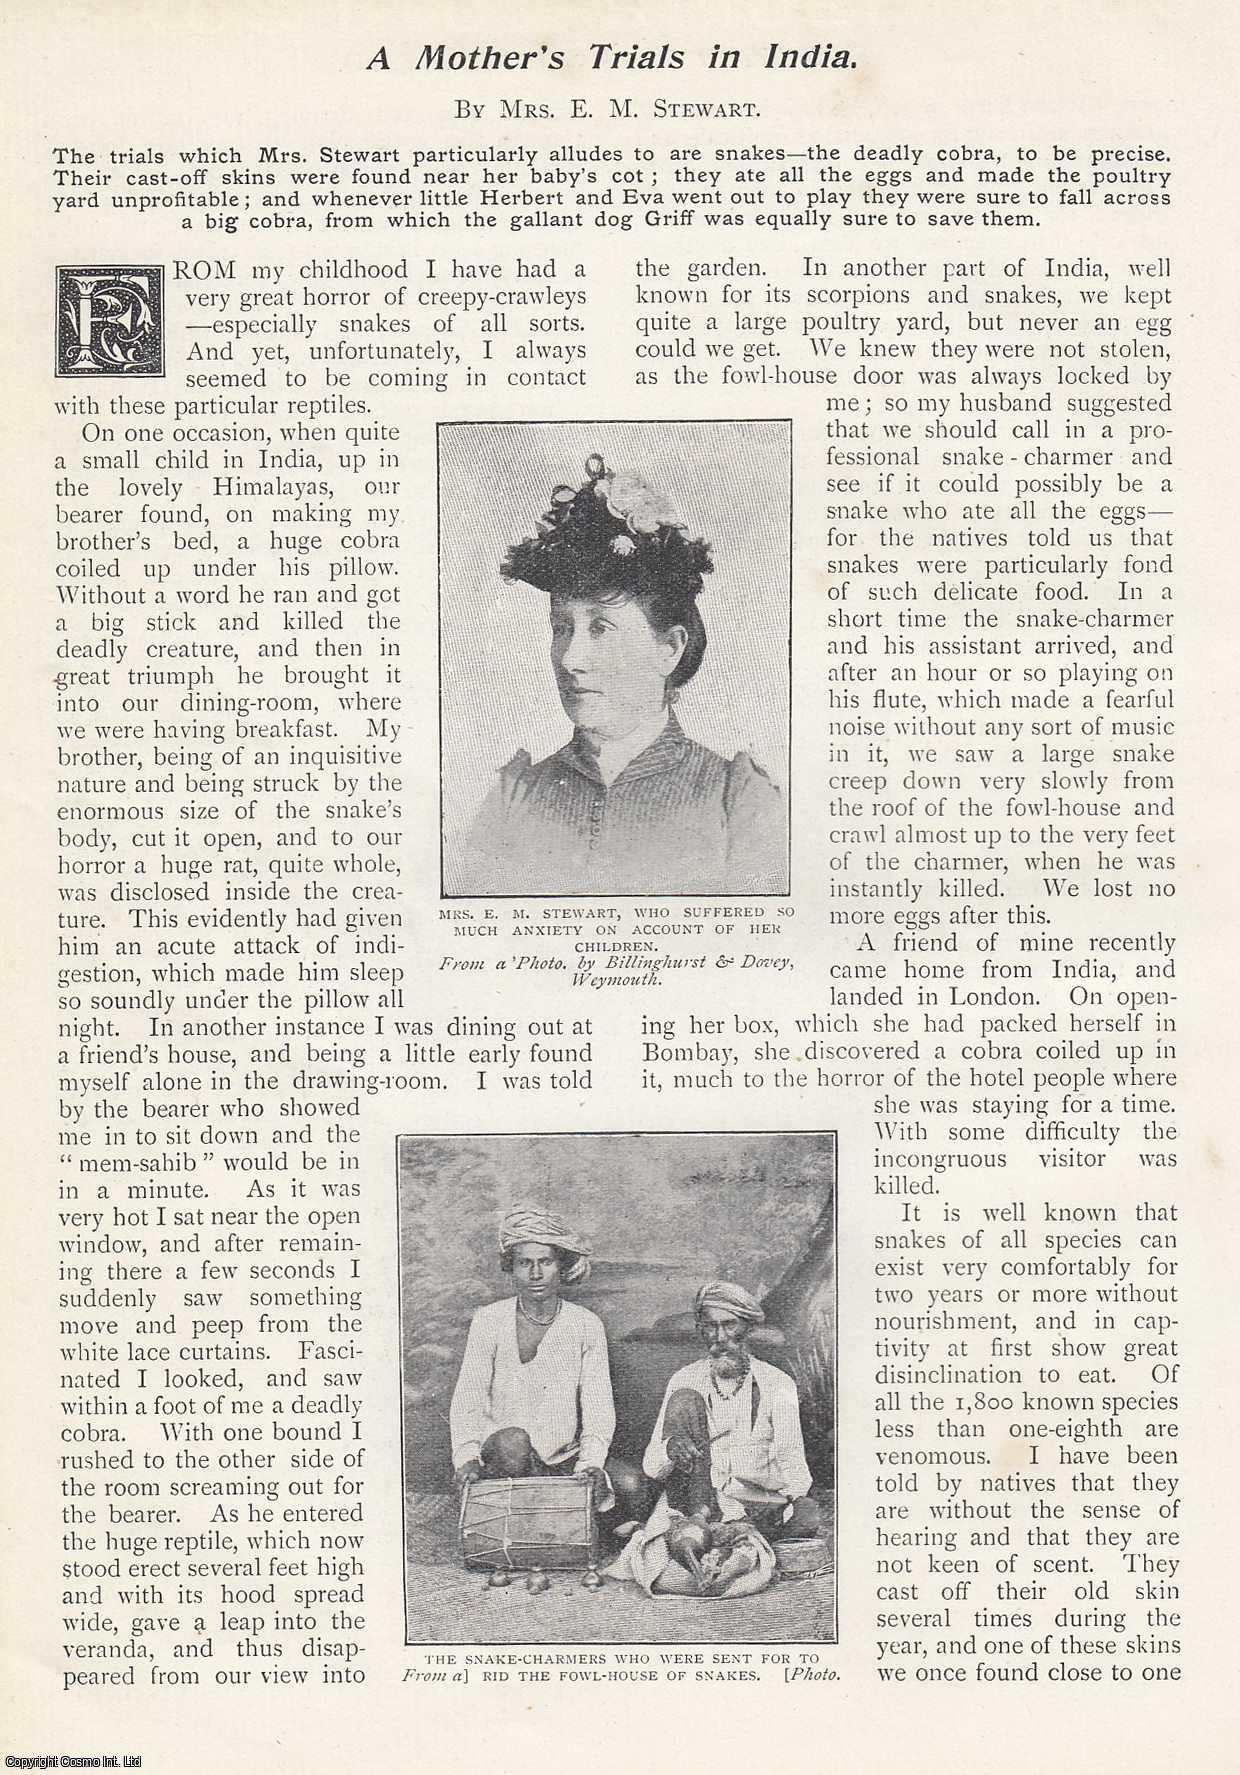 Mrs. E. M. Stewart - A Mother's Trials in India. An uncommon original article from the Wide World Magazine, 1900.